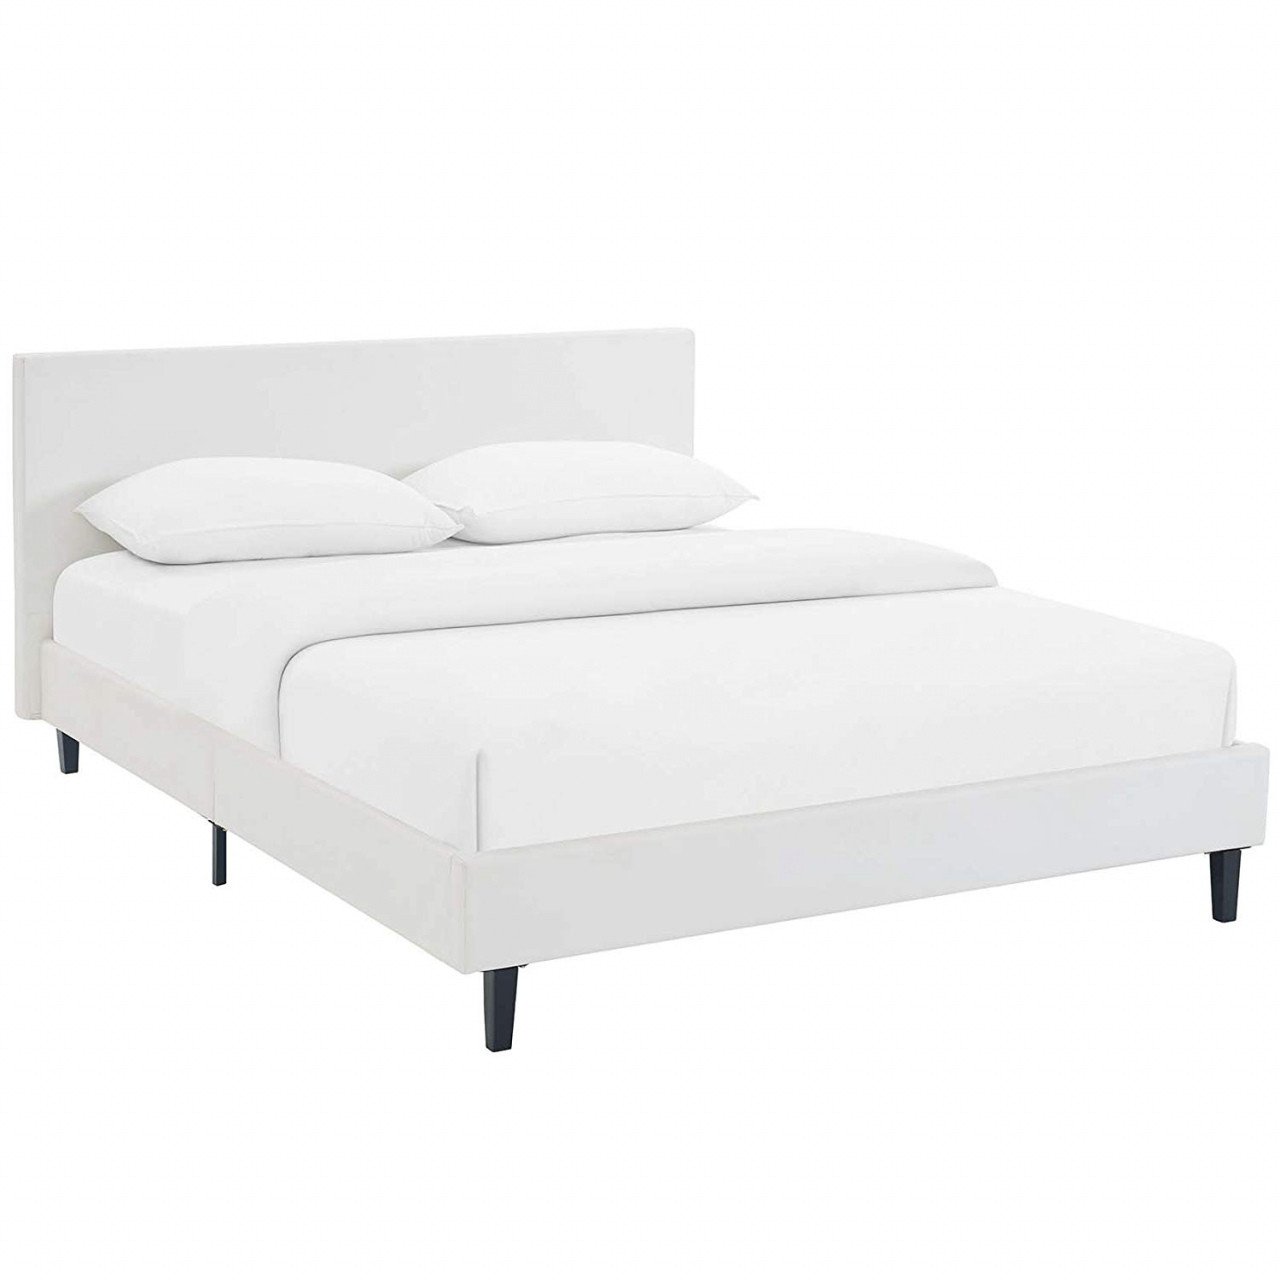 White Contemporary Bedroom Furniture New White Queen Platform Bed — Procura Home Blog